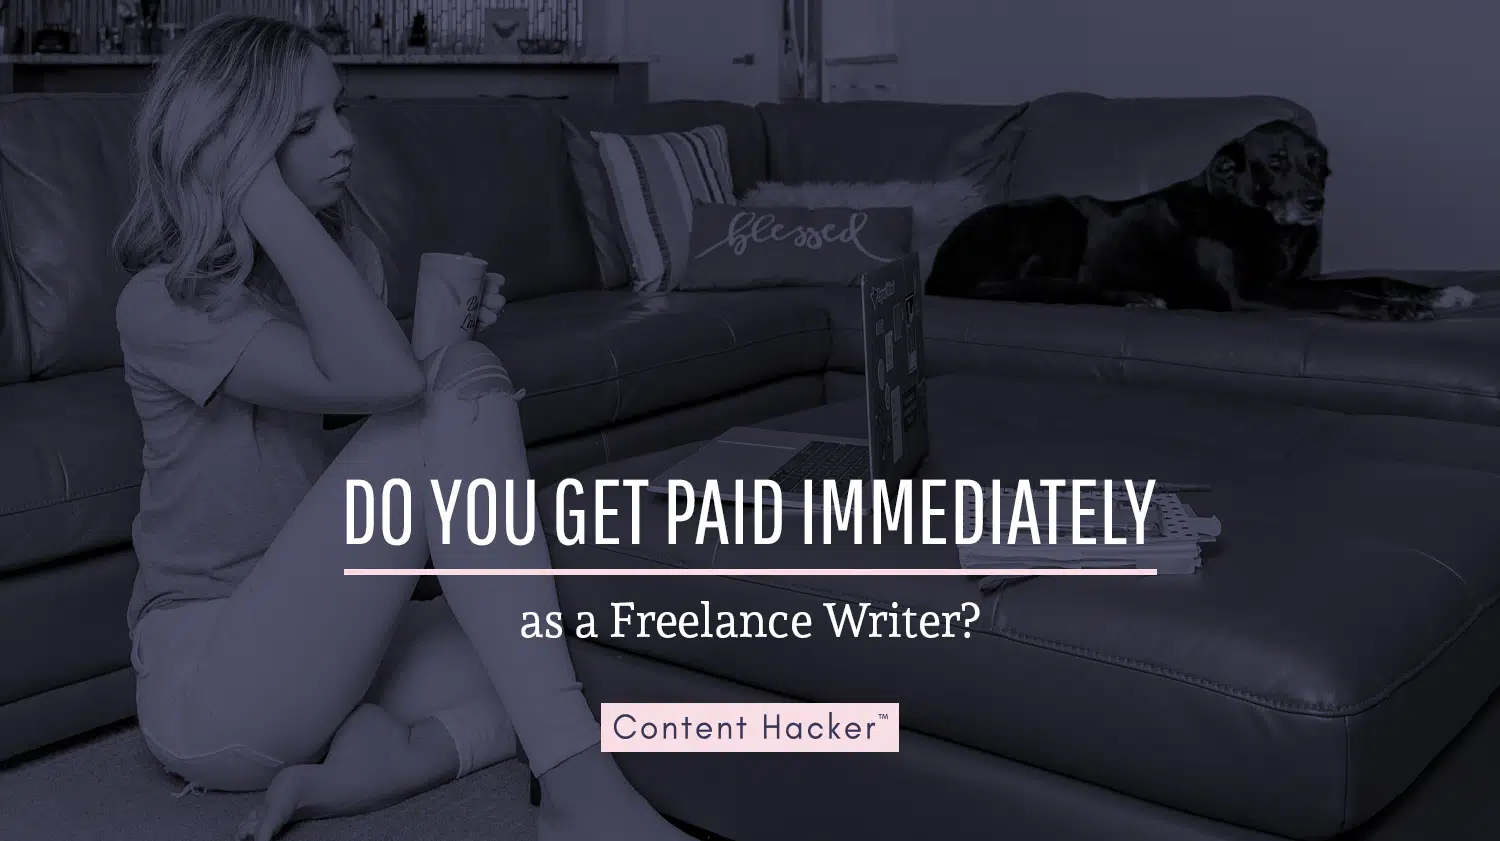 do you get paid immediately by being a freelance writer